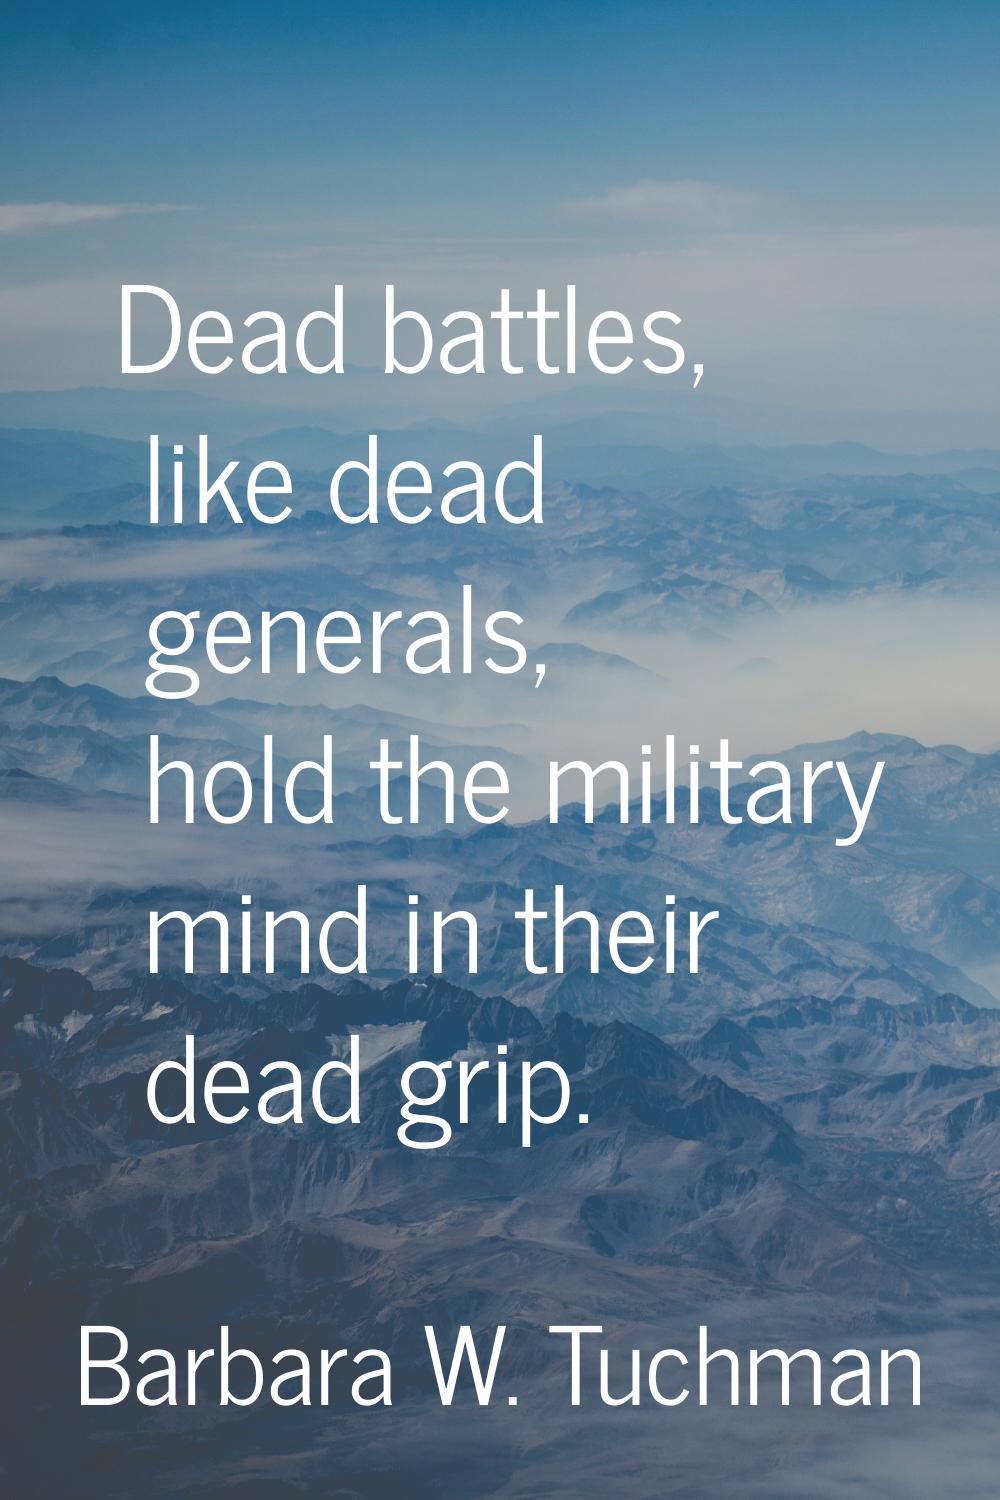 Dead battles, like dead generals, hold the military mind in their dead grip.